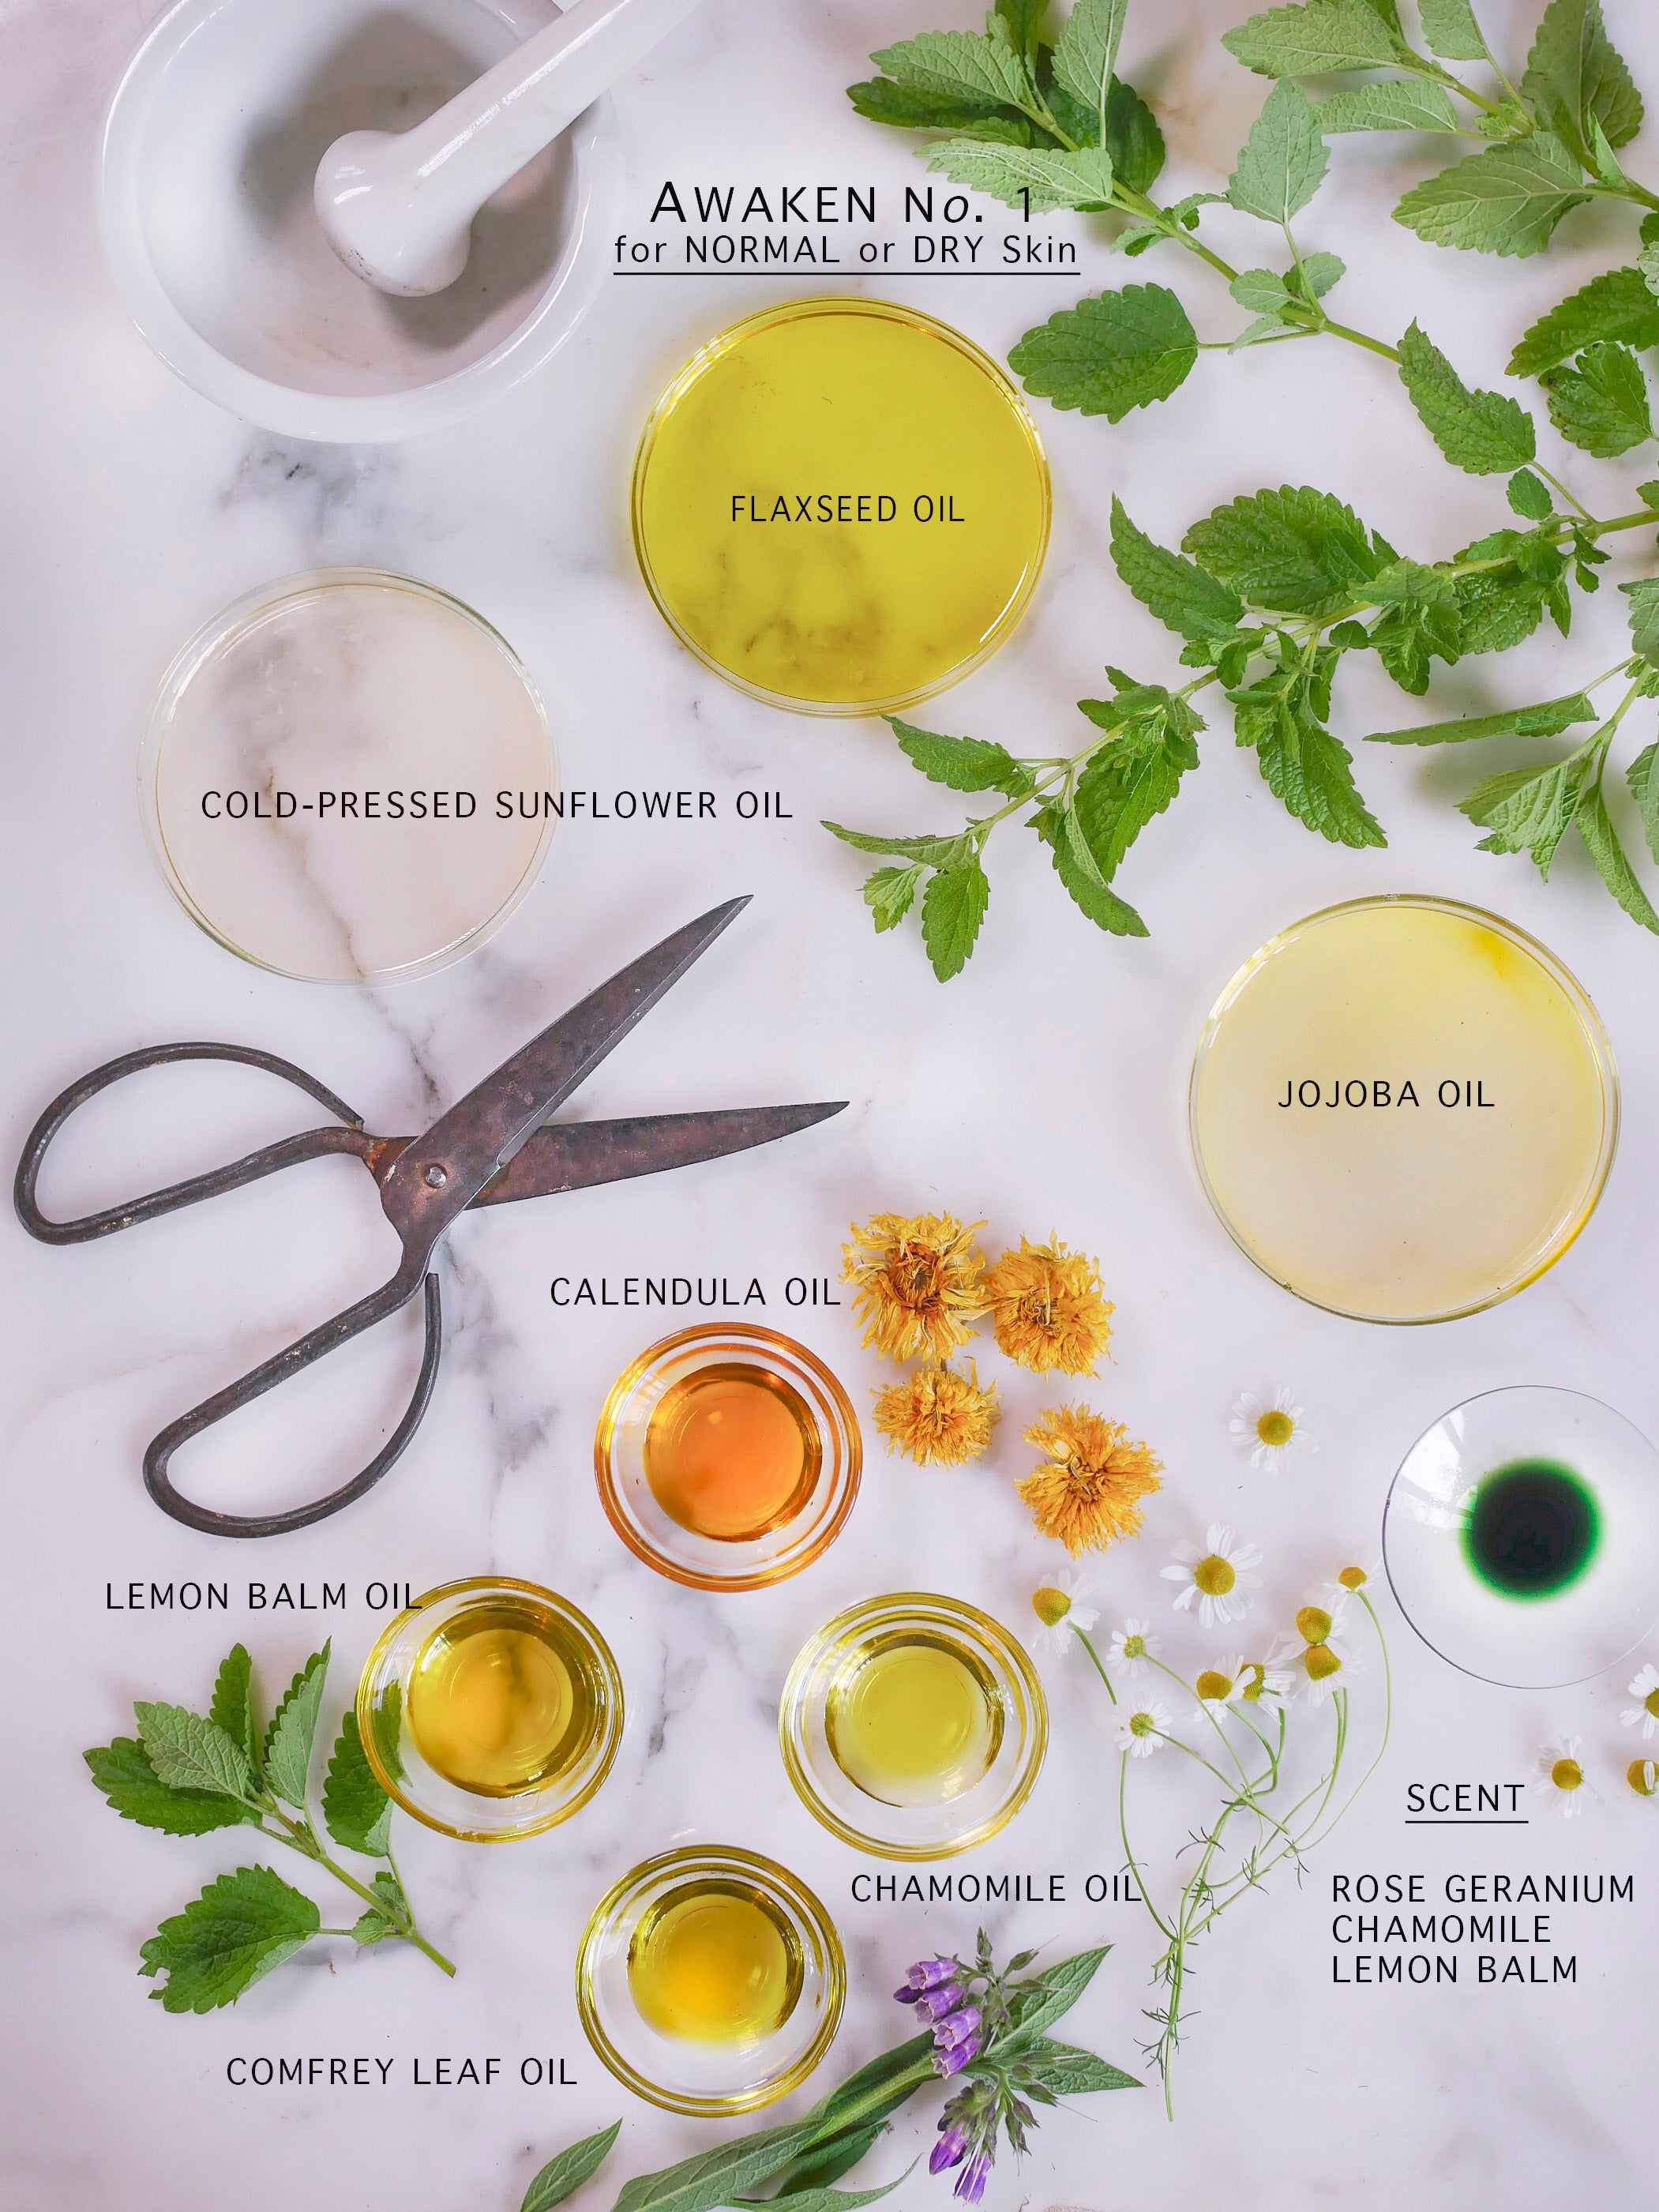 Botanical ingredients of day serum included in the dry skin kit.